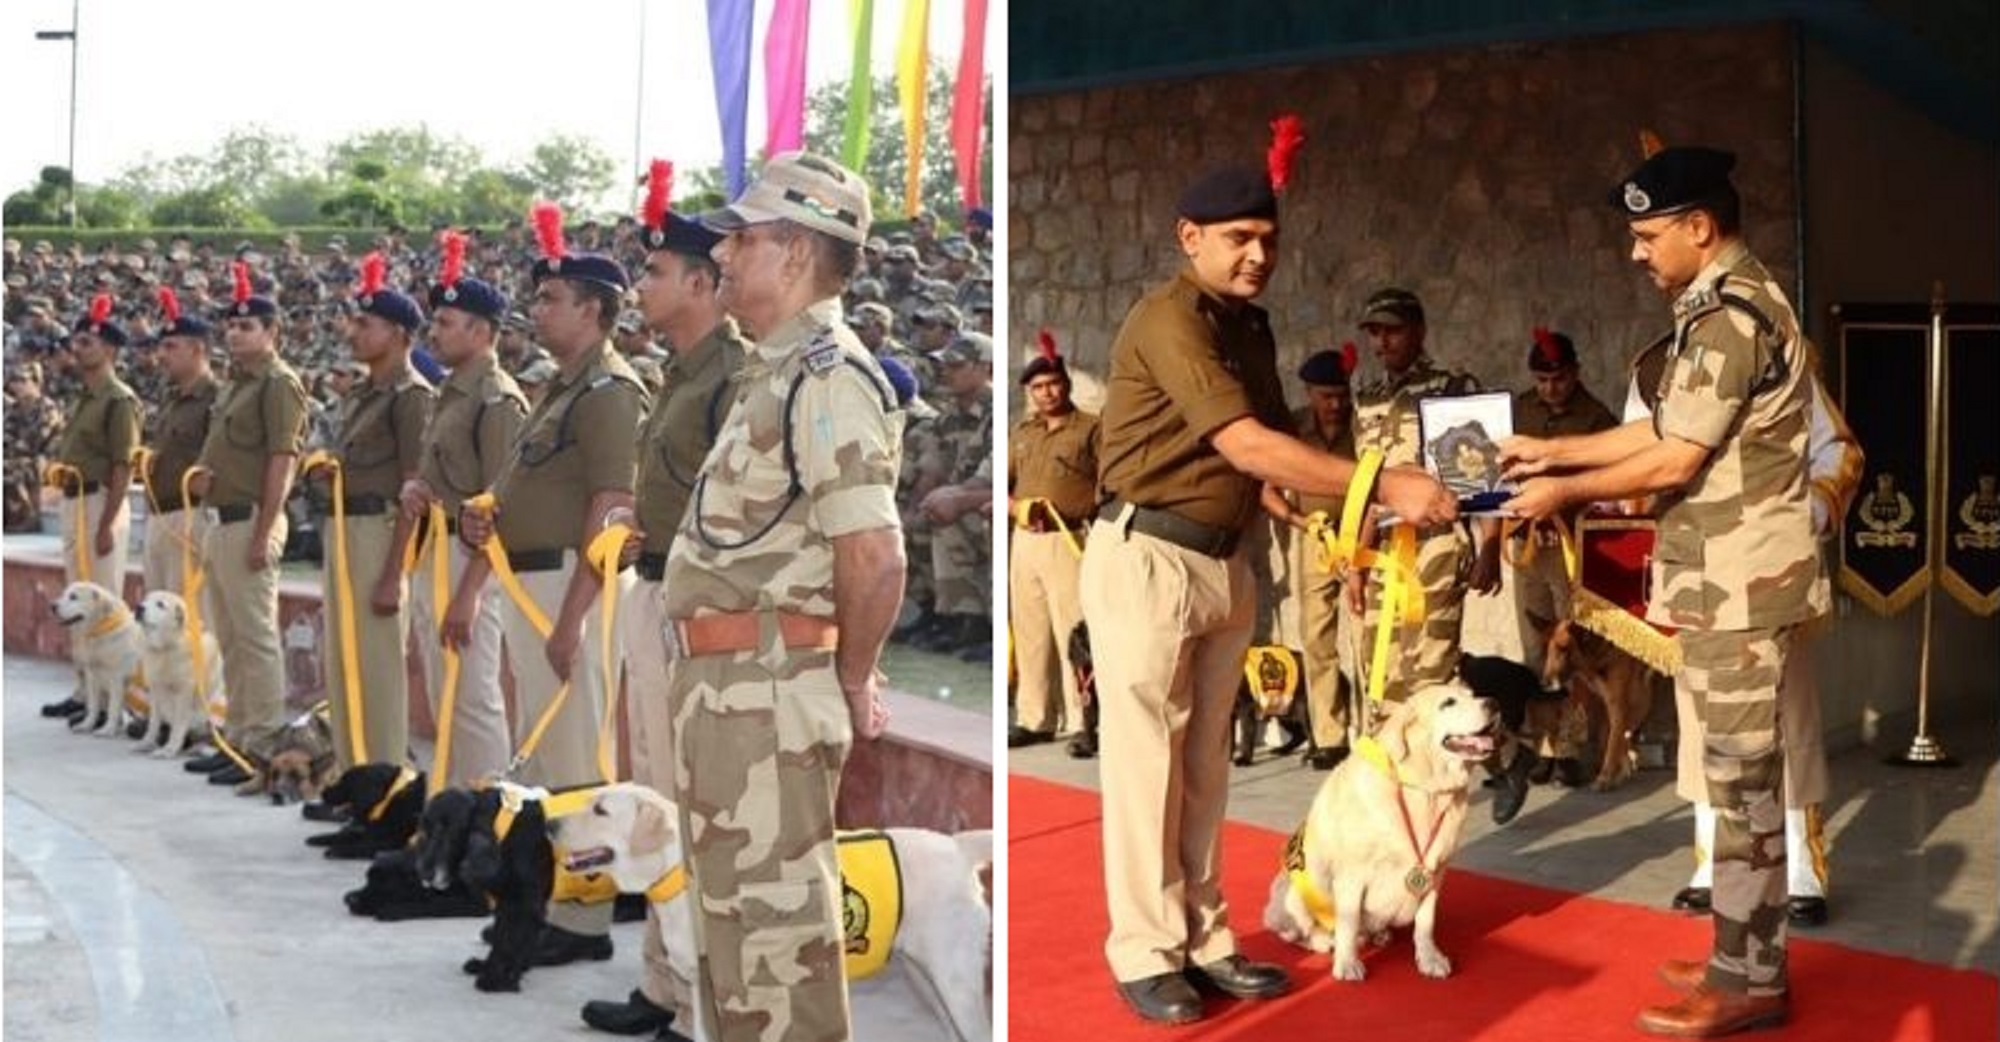 CISF Bids Honourable Farewell To Its ‘Canine Soldiers’ in a Heartwarming Ceremony